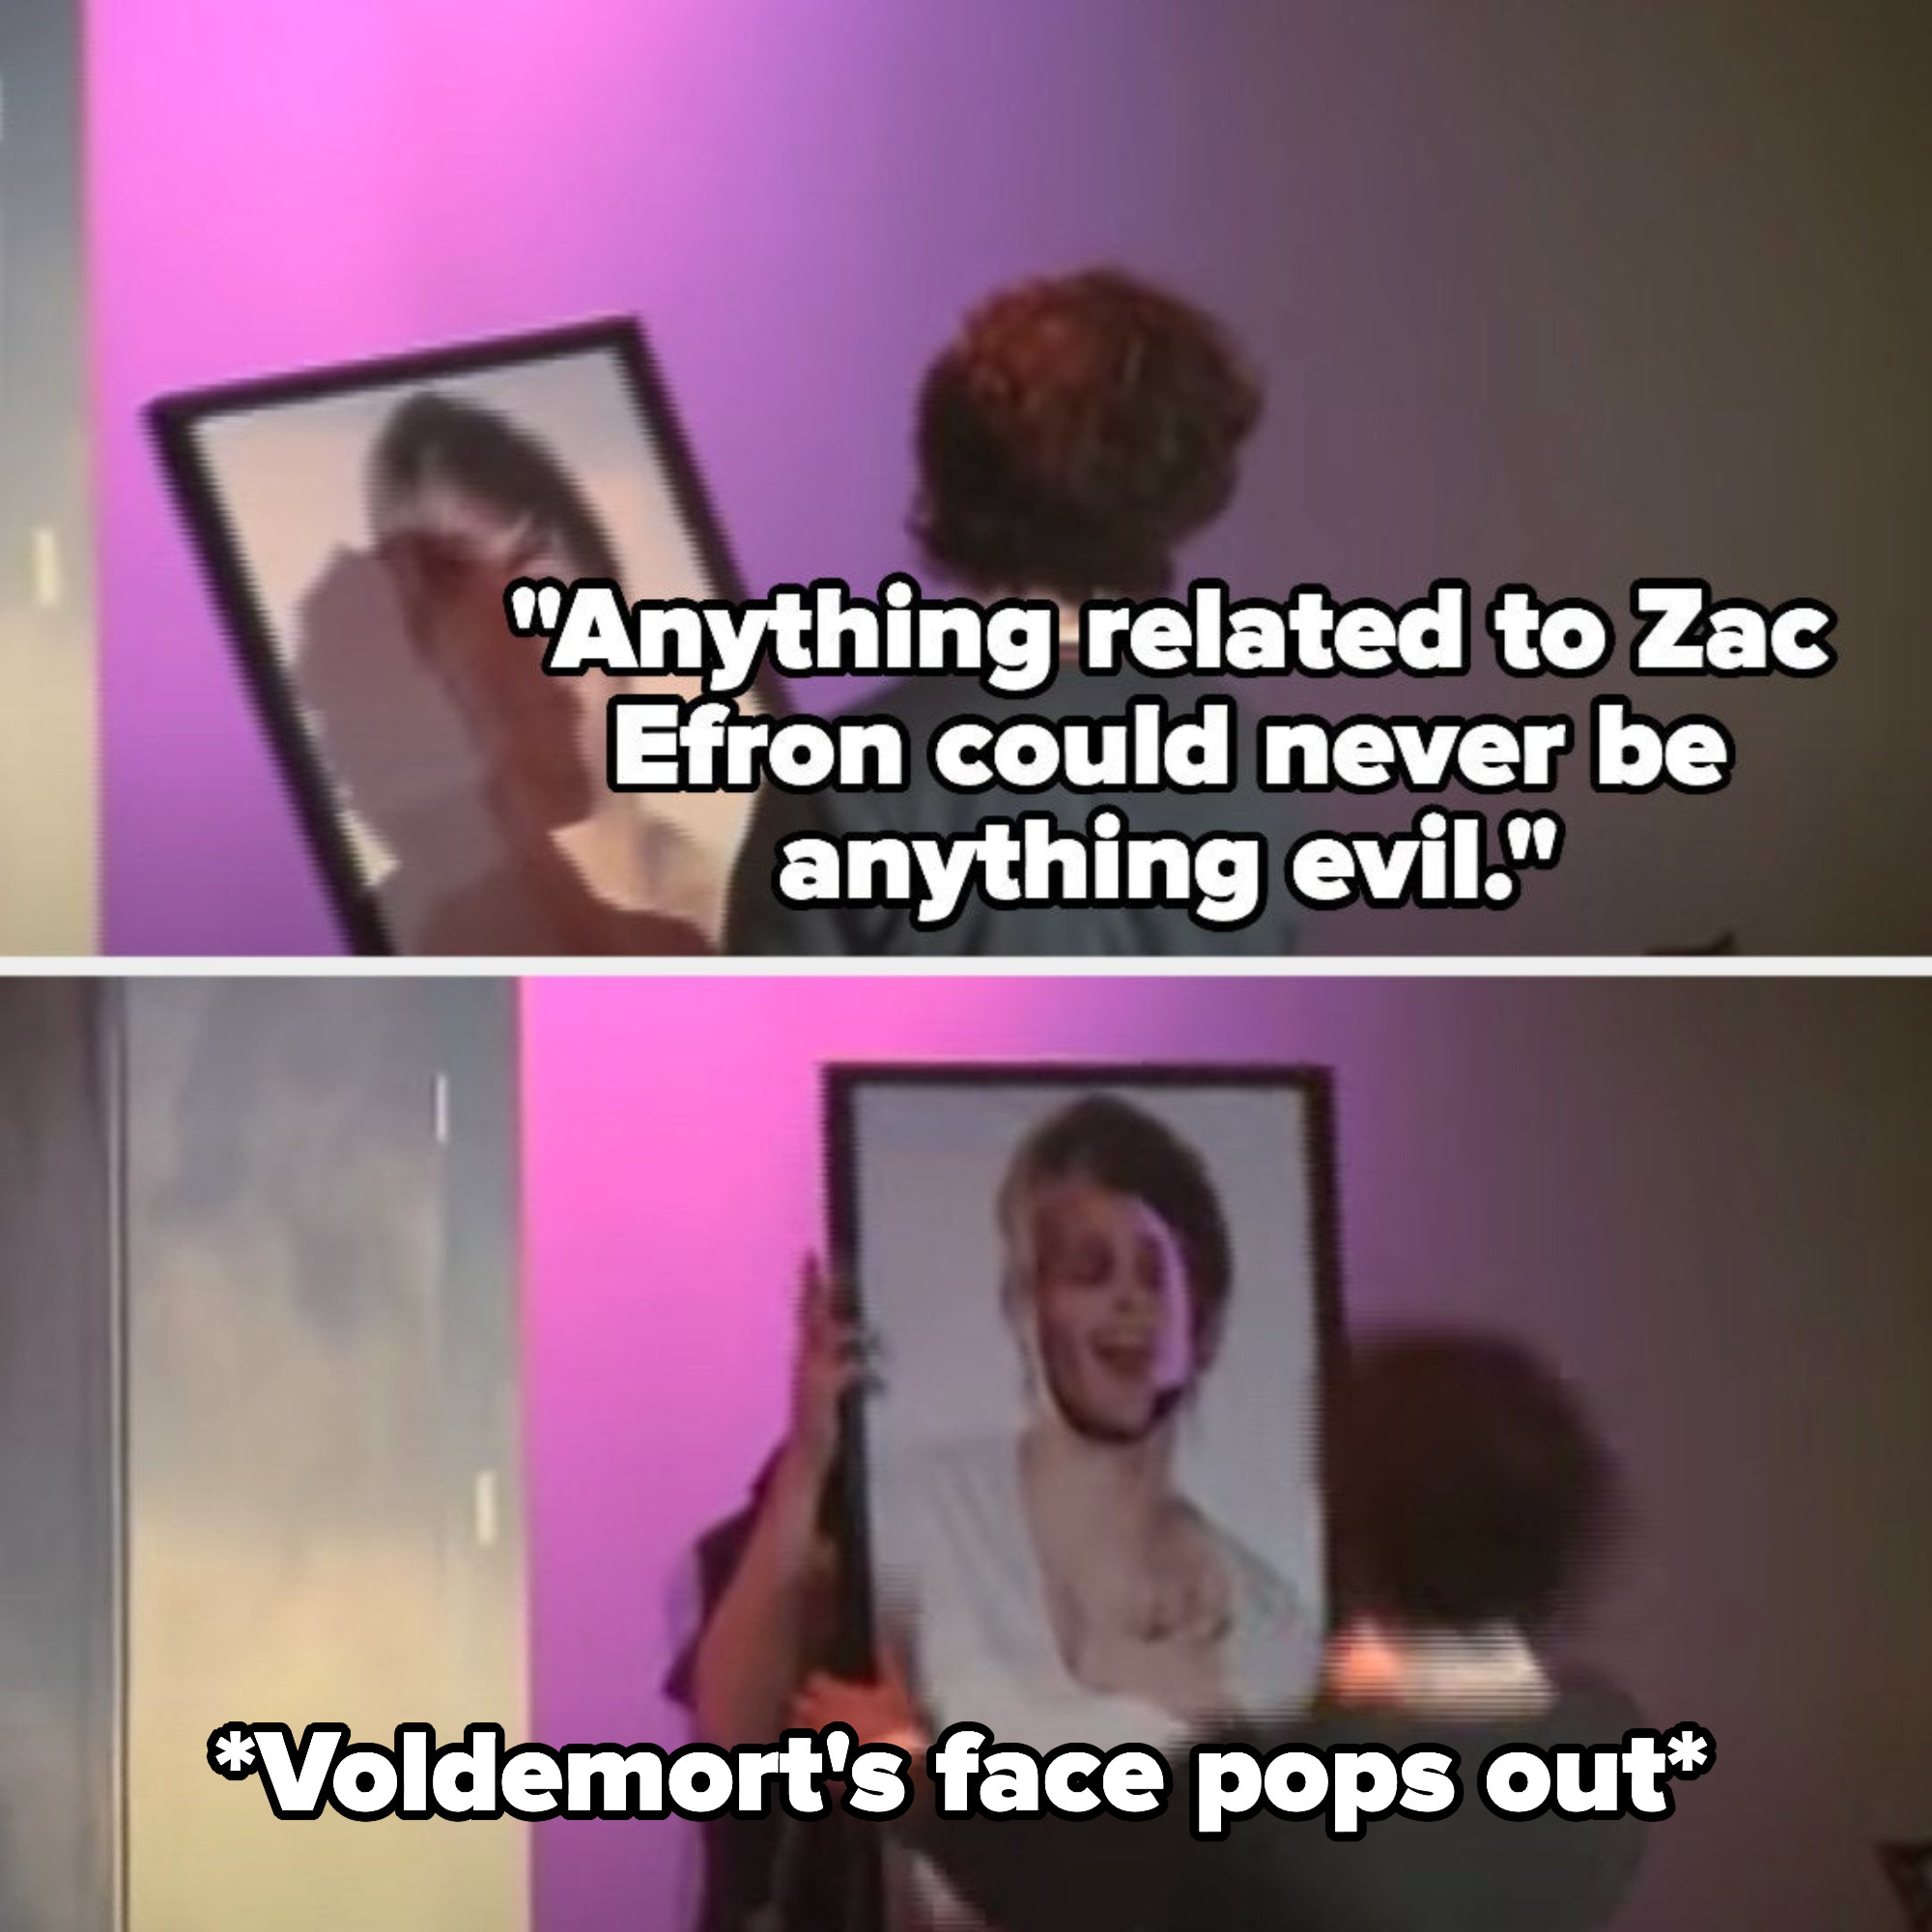 Harry says nothing related to Zac Efron could be evil, but then Voldemort&#x27;s face pops out of the poster